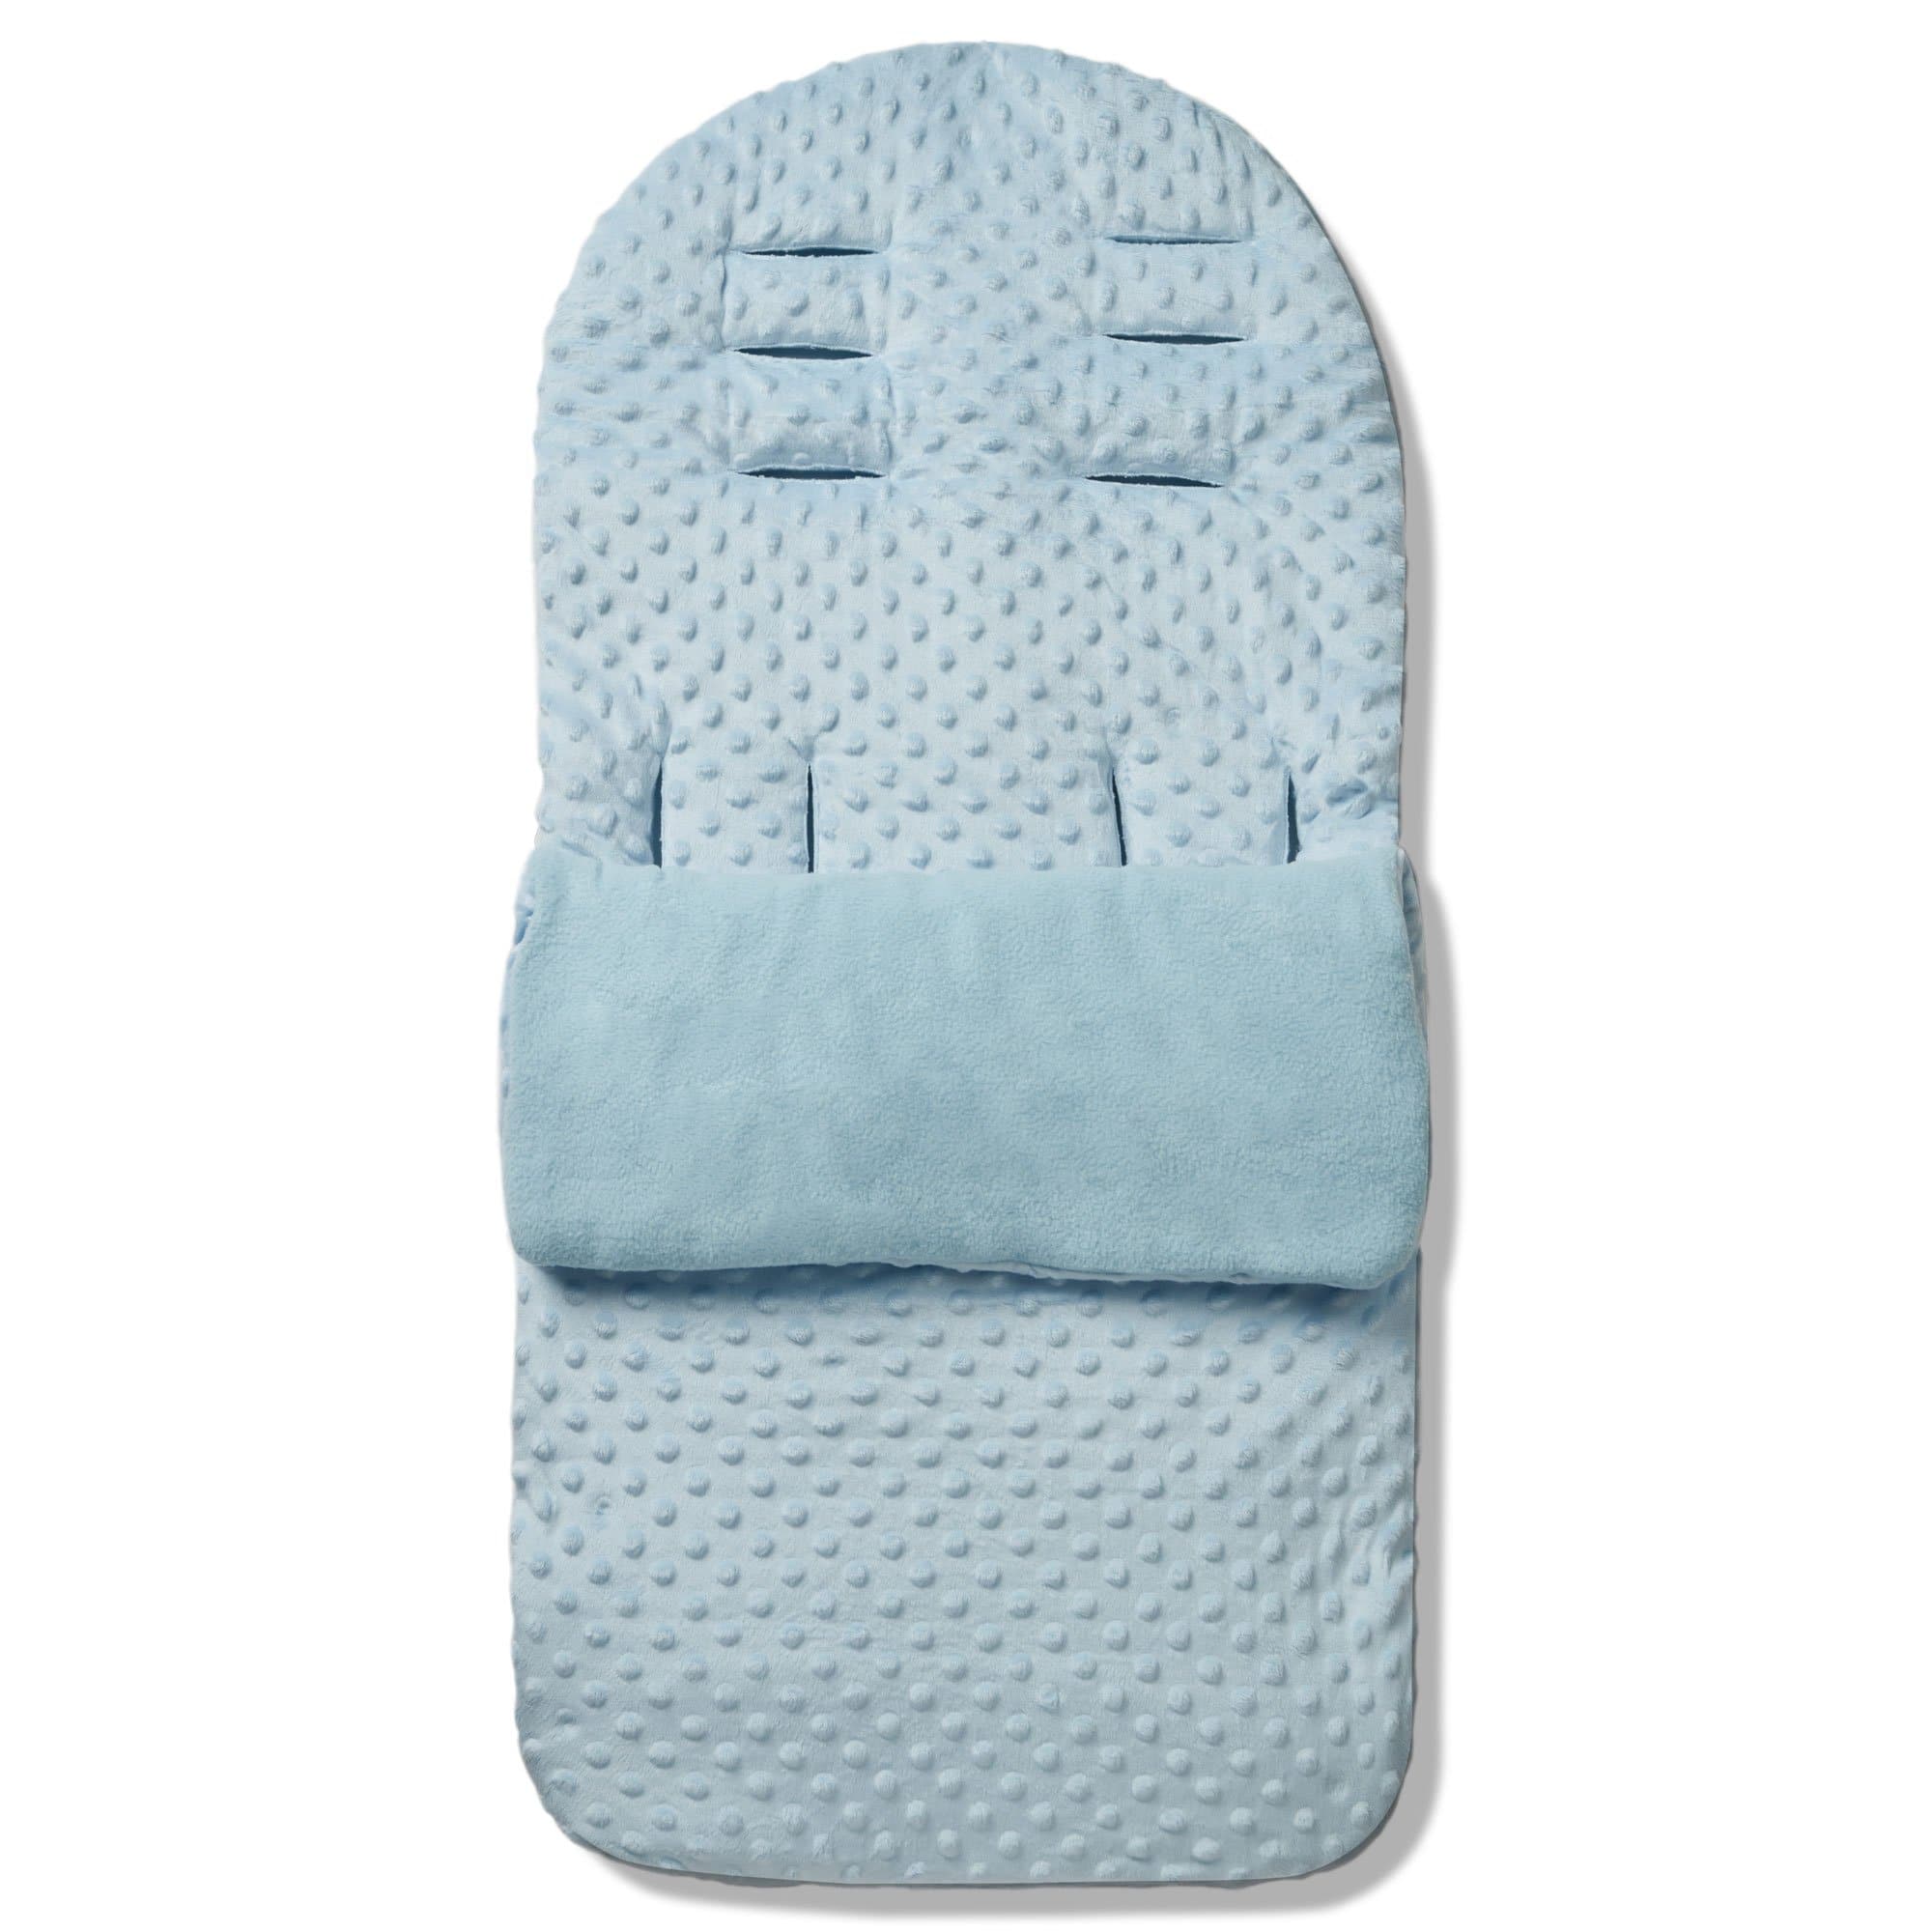 Dimple Footmuff / Cosy Toes Compatible with Baby Jogger - Blue / Fits All Models | For Your Little One